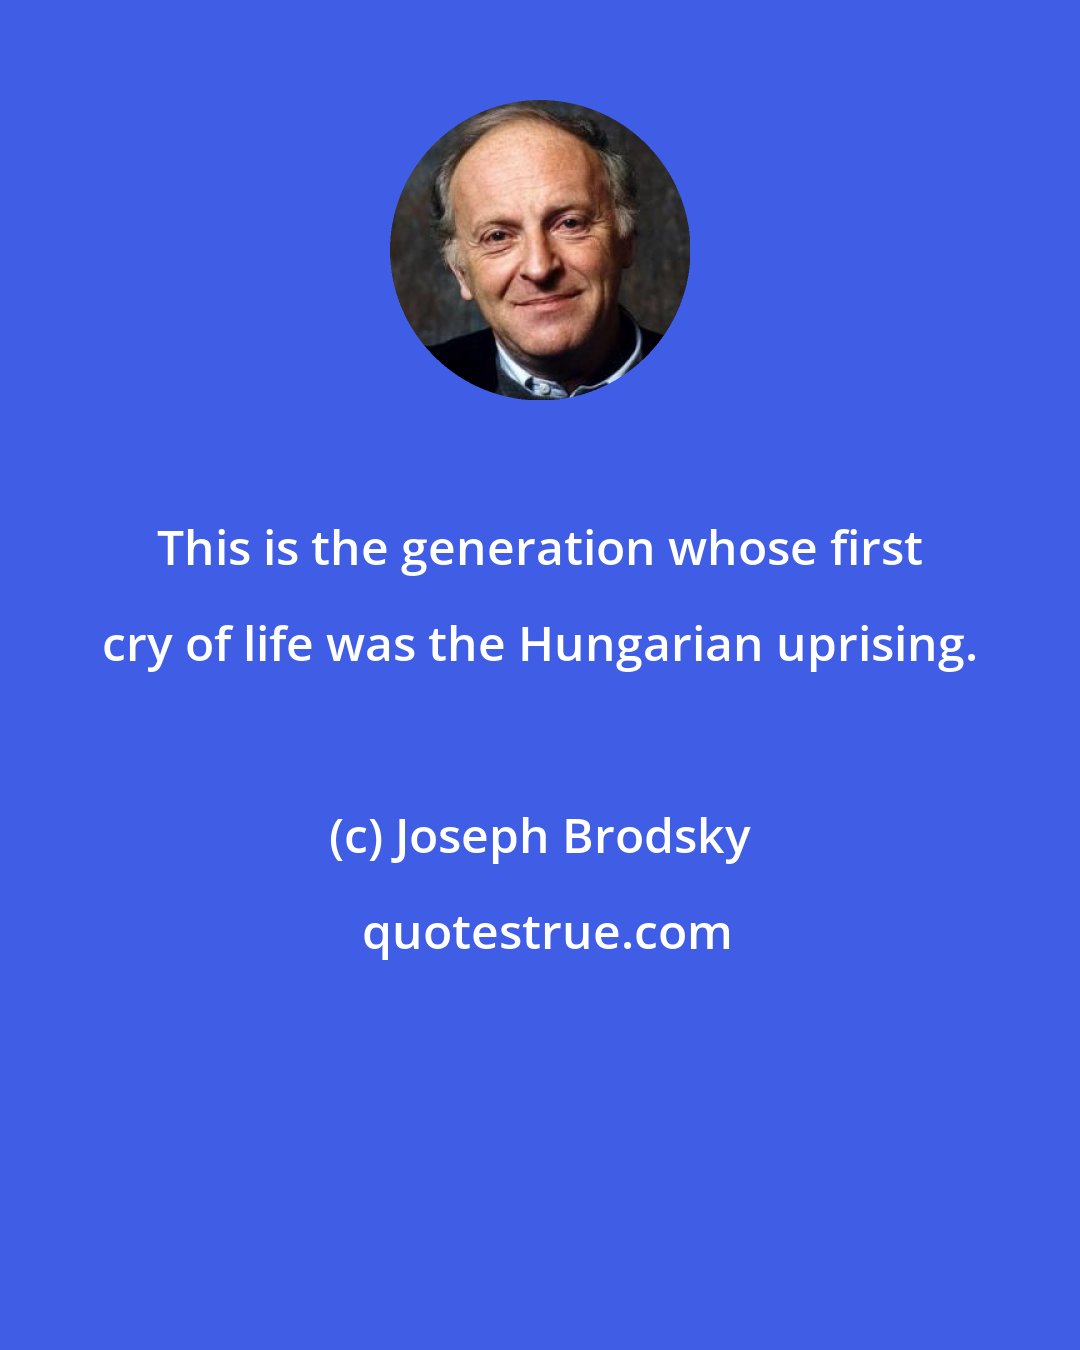 Joseph Brodsky: This is the generation whose first cry of life was the Hungarian uprising.